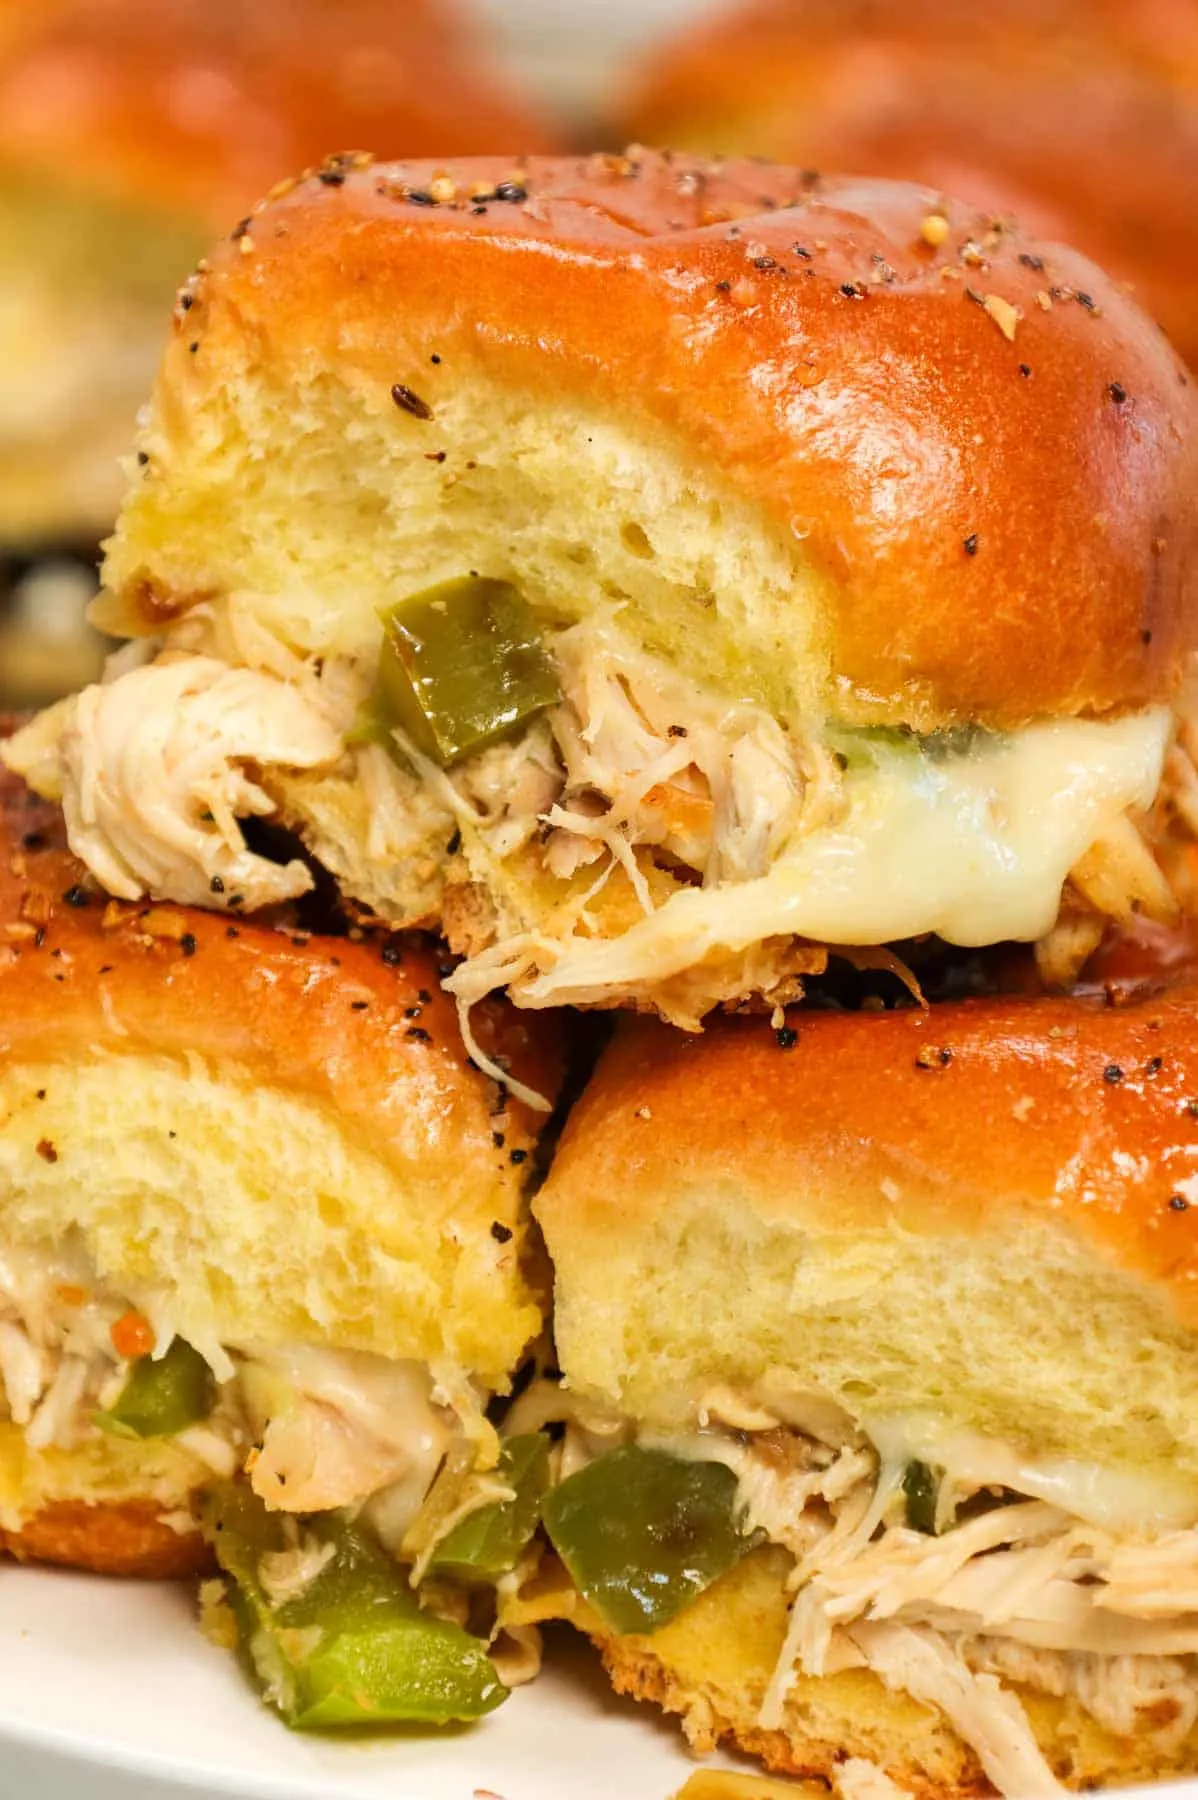 Chicken Philly Sliders are delicious mini sandwiches on brioche dinner rolls loaded with shredded chicken, green bell peppers, onions and Provolone cheese.